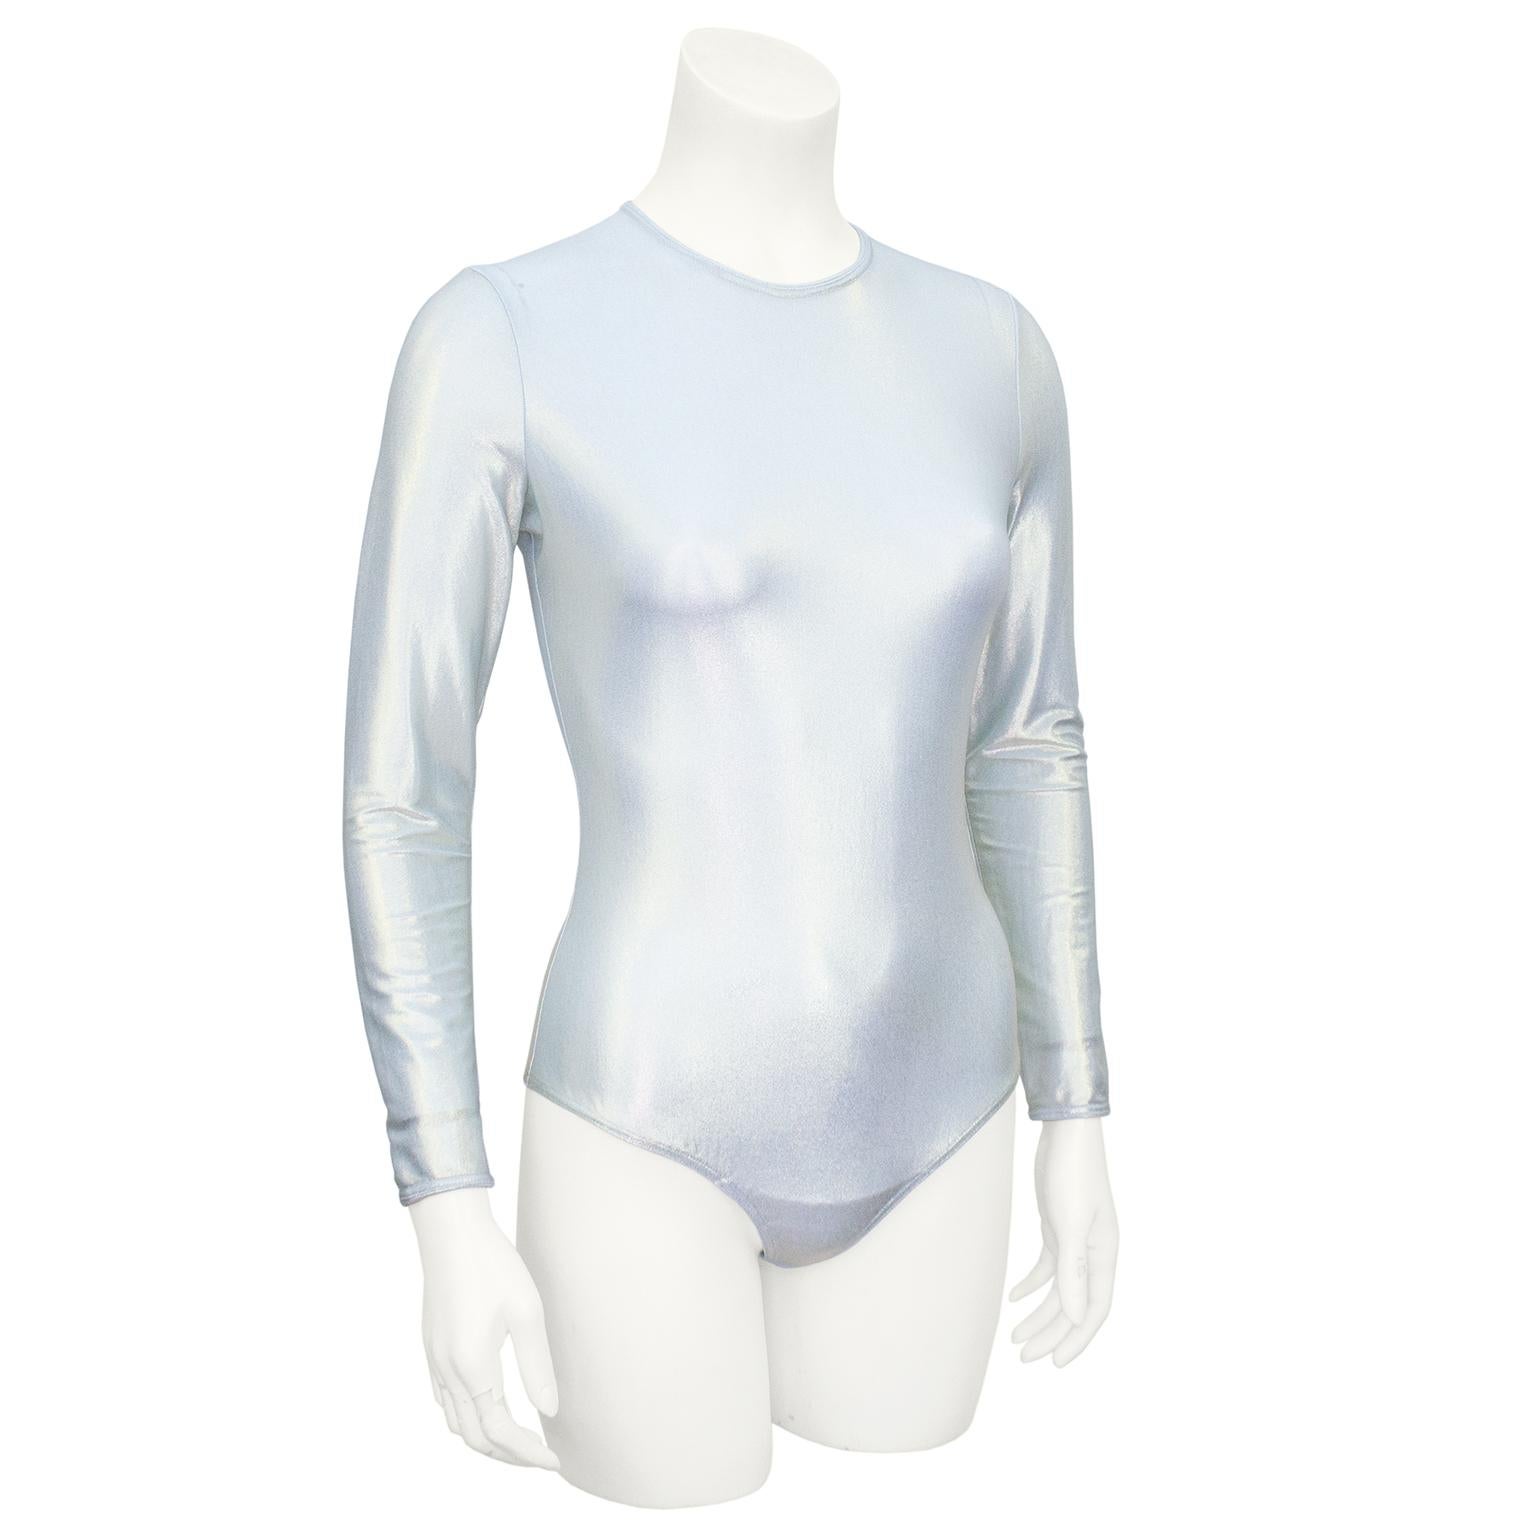 1990s Gianni Versace Couture bodysuit. Metallic iridescent pale blue lame with tonal top stitching. Fabric has lots of stretch. Round neckline, invisible zipper up centre back and hook and eyes at bottom. Excellent vintage condition. Fits like a US